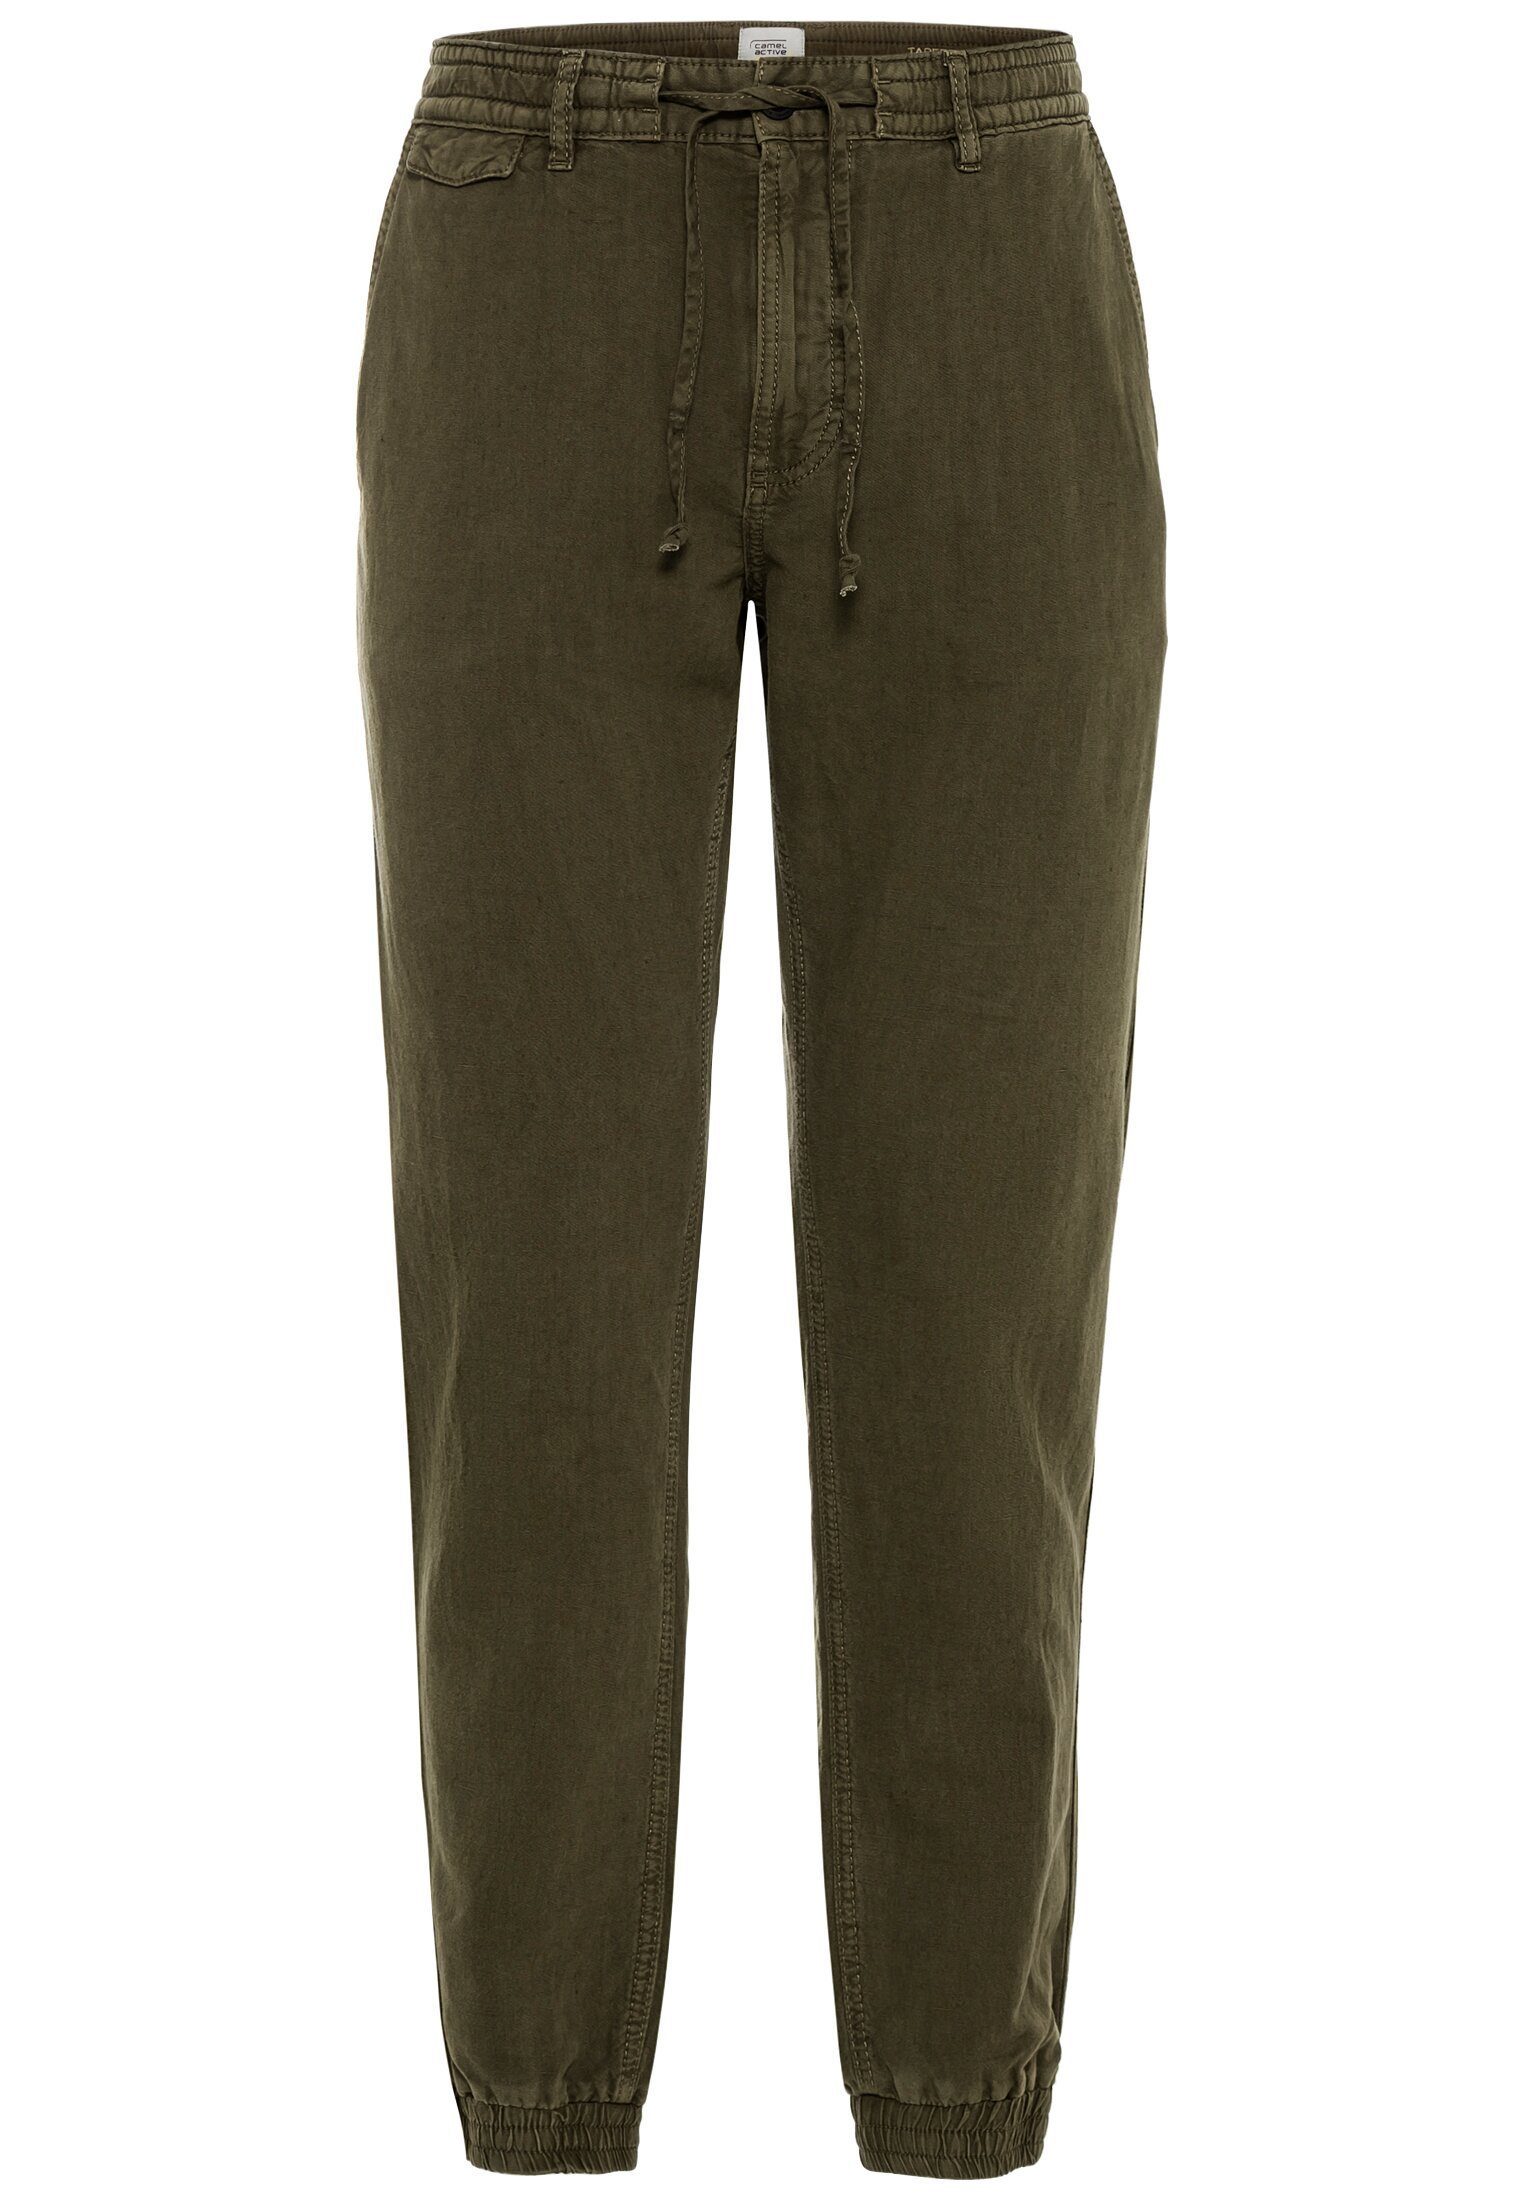 camel active Chinohose camel active Herren Chino Tapered Fit